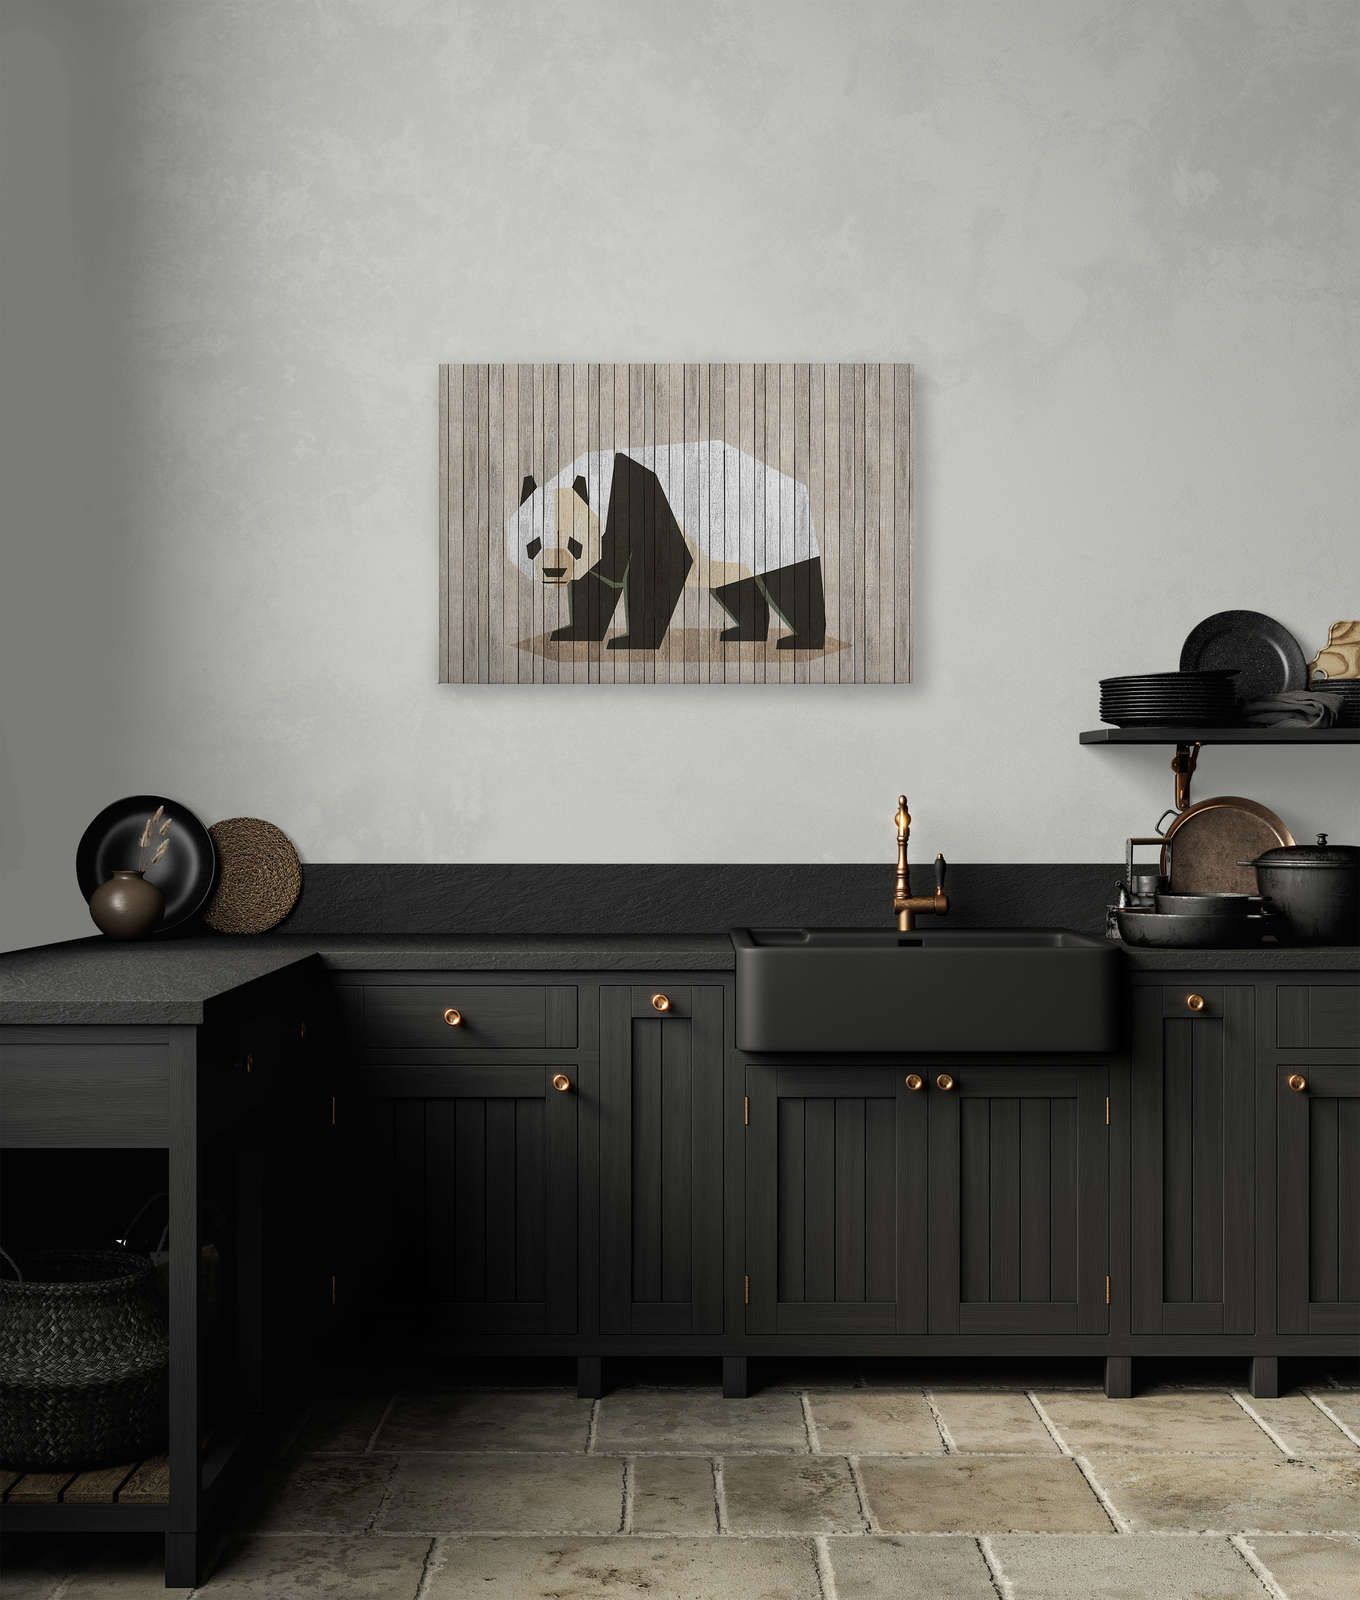             Born to Be Wild 2 - Canvas painting on wood panel structure with panda & board wall - 0.90 m x 0.60 m
        